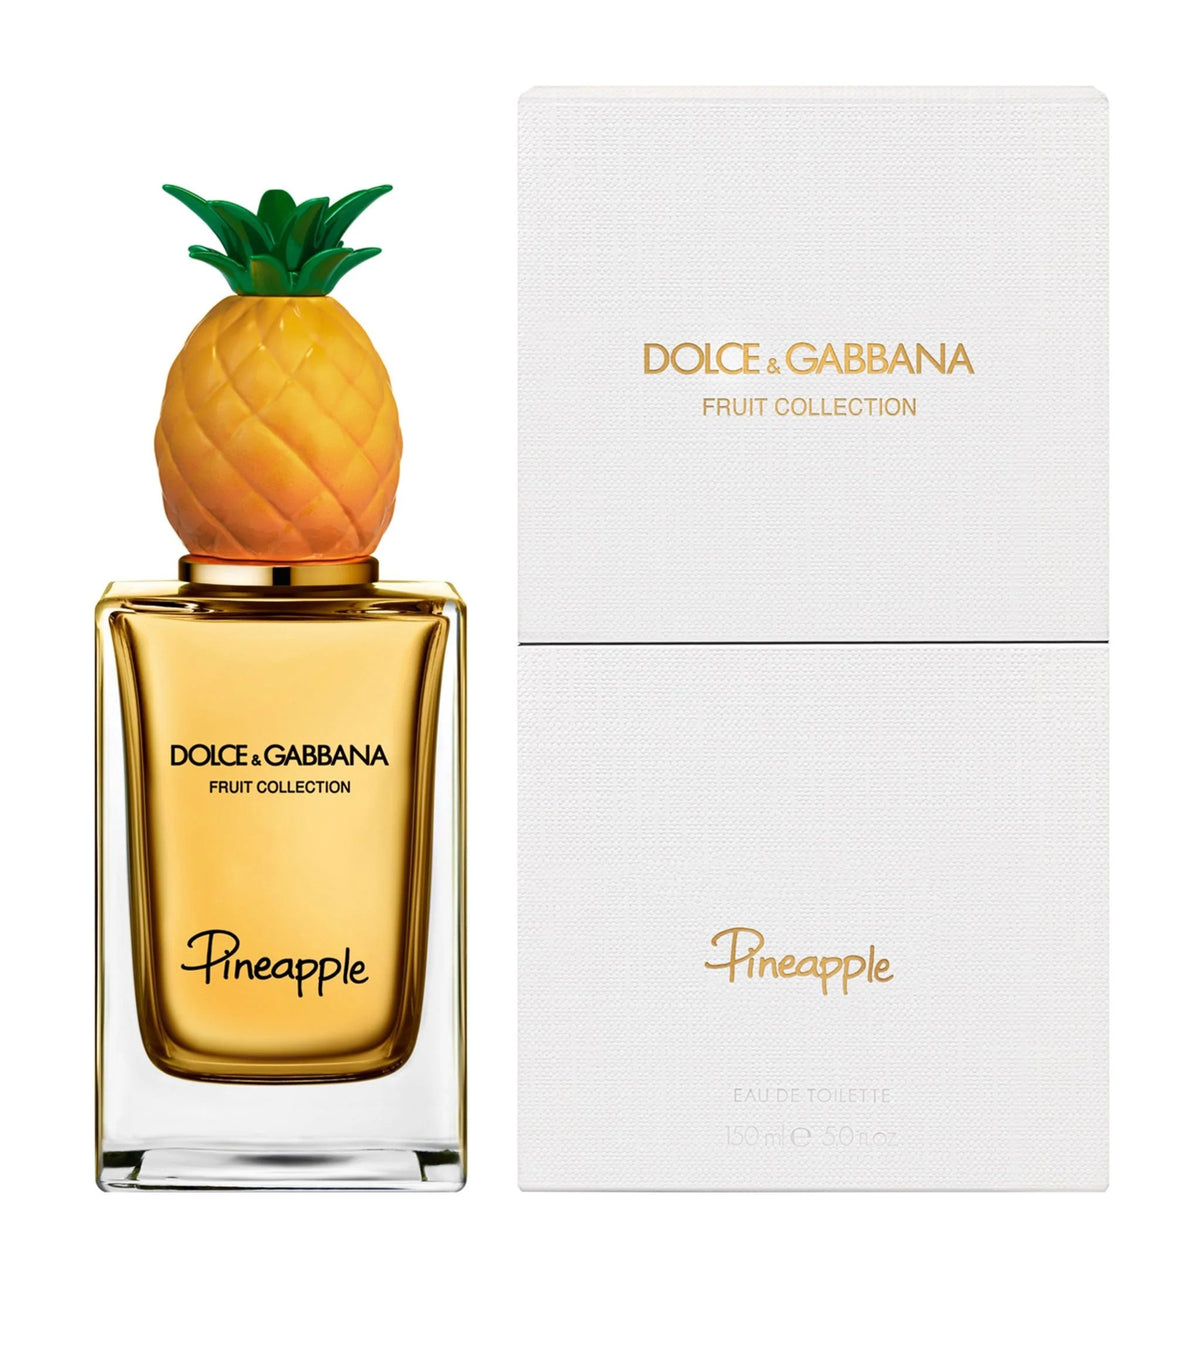 Dolce & Gabbana Fruit Collection - Pineapple 150ml